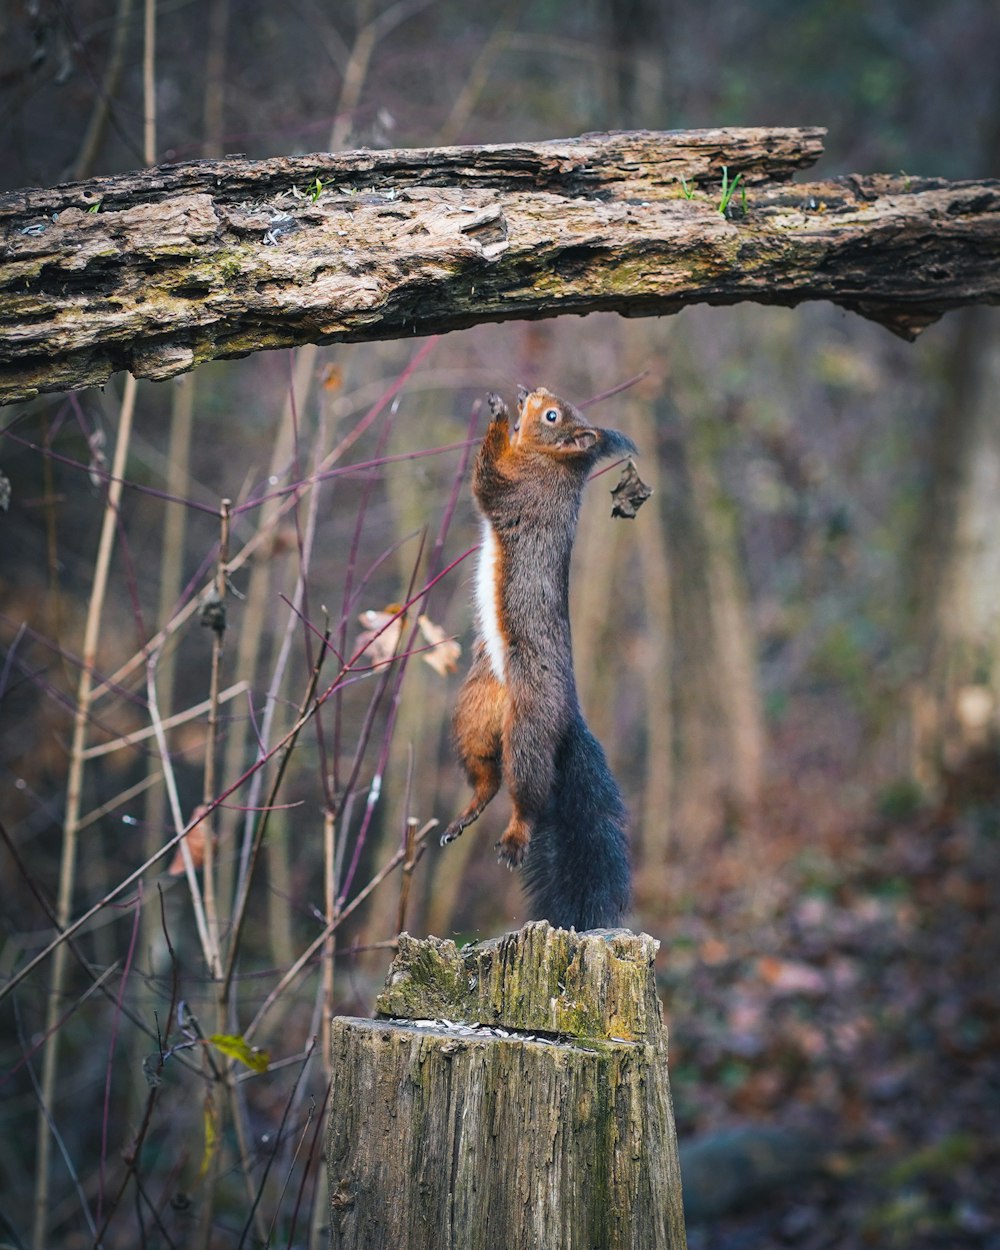 a squirrel standing on its hind legs on a tree stump